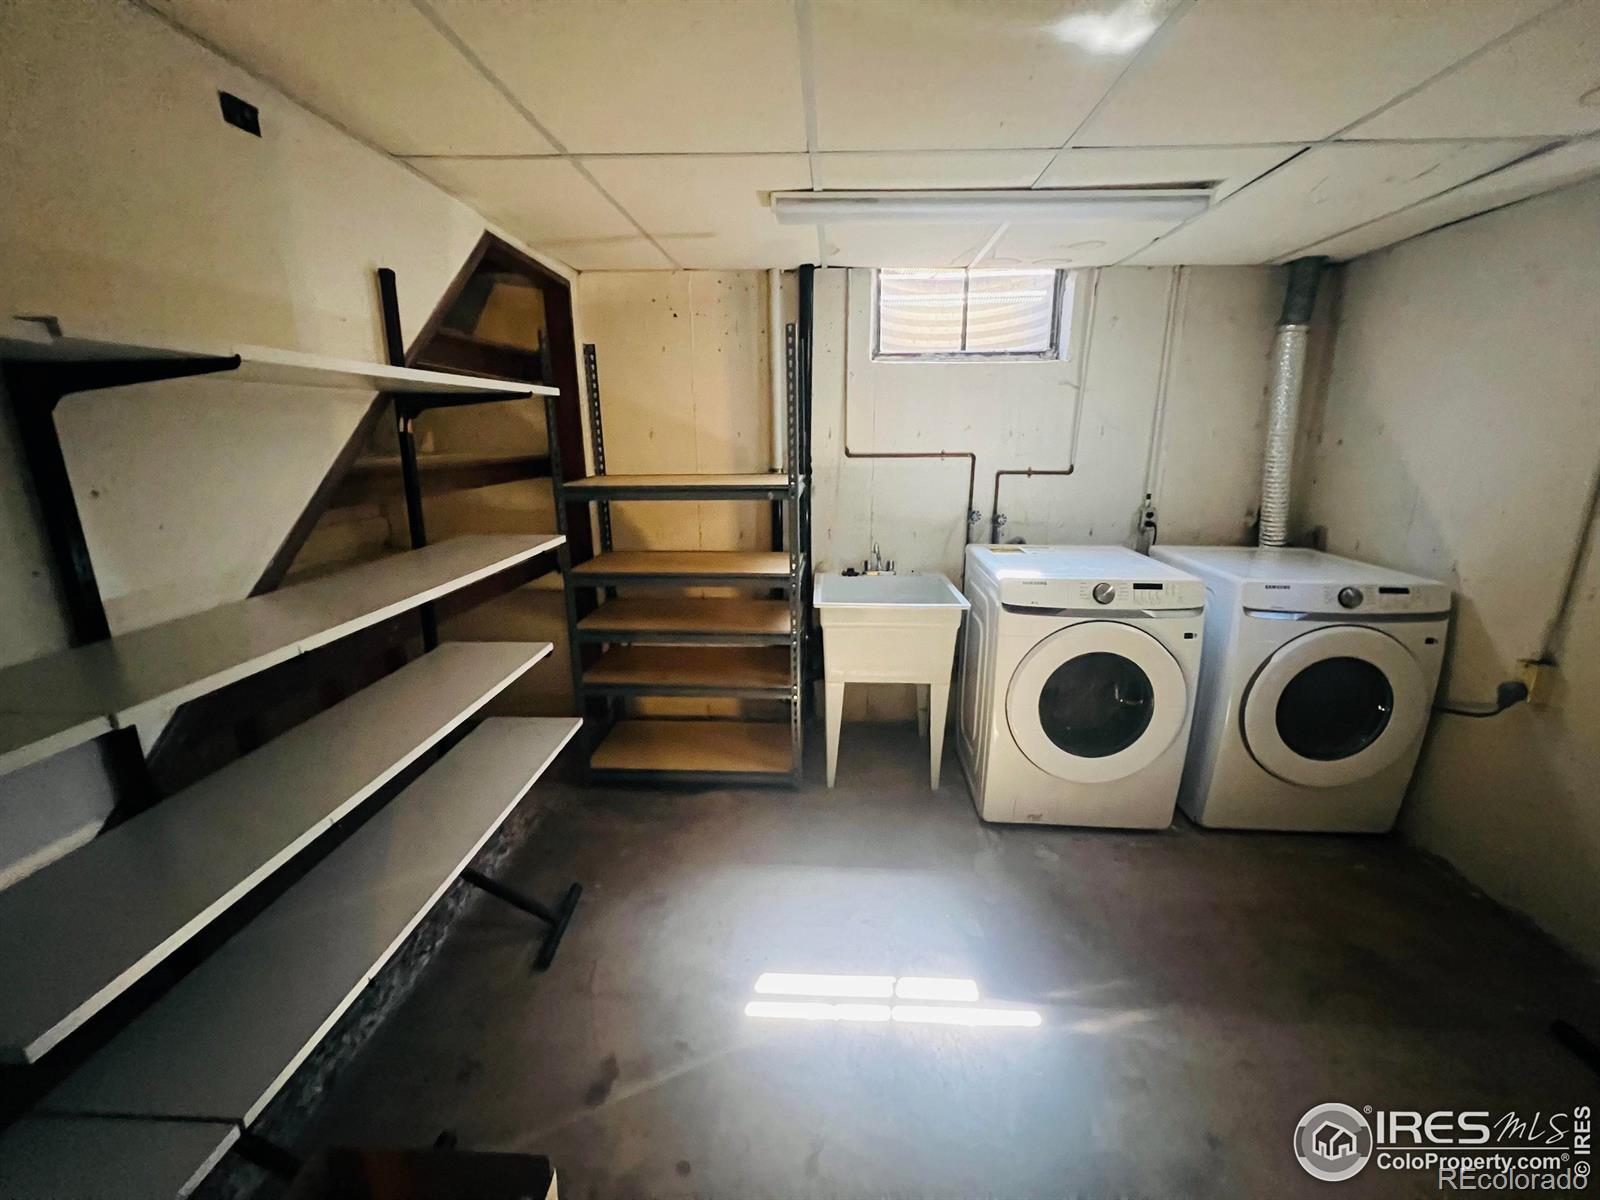 Laundry room with shelving and storage